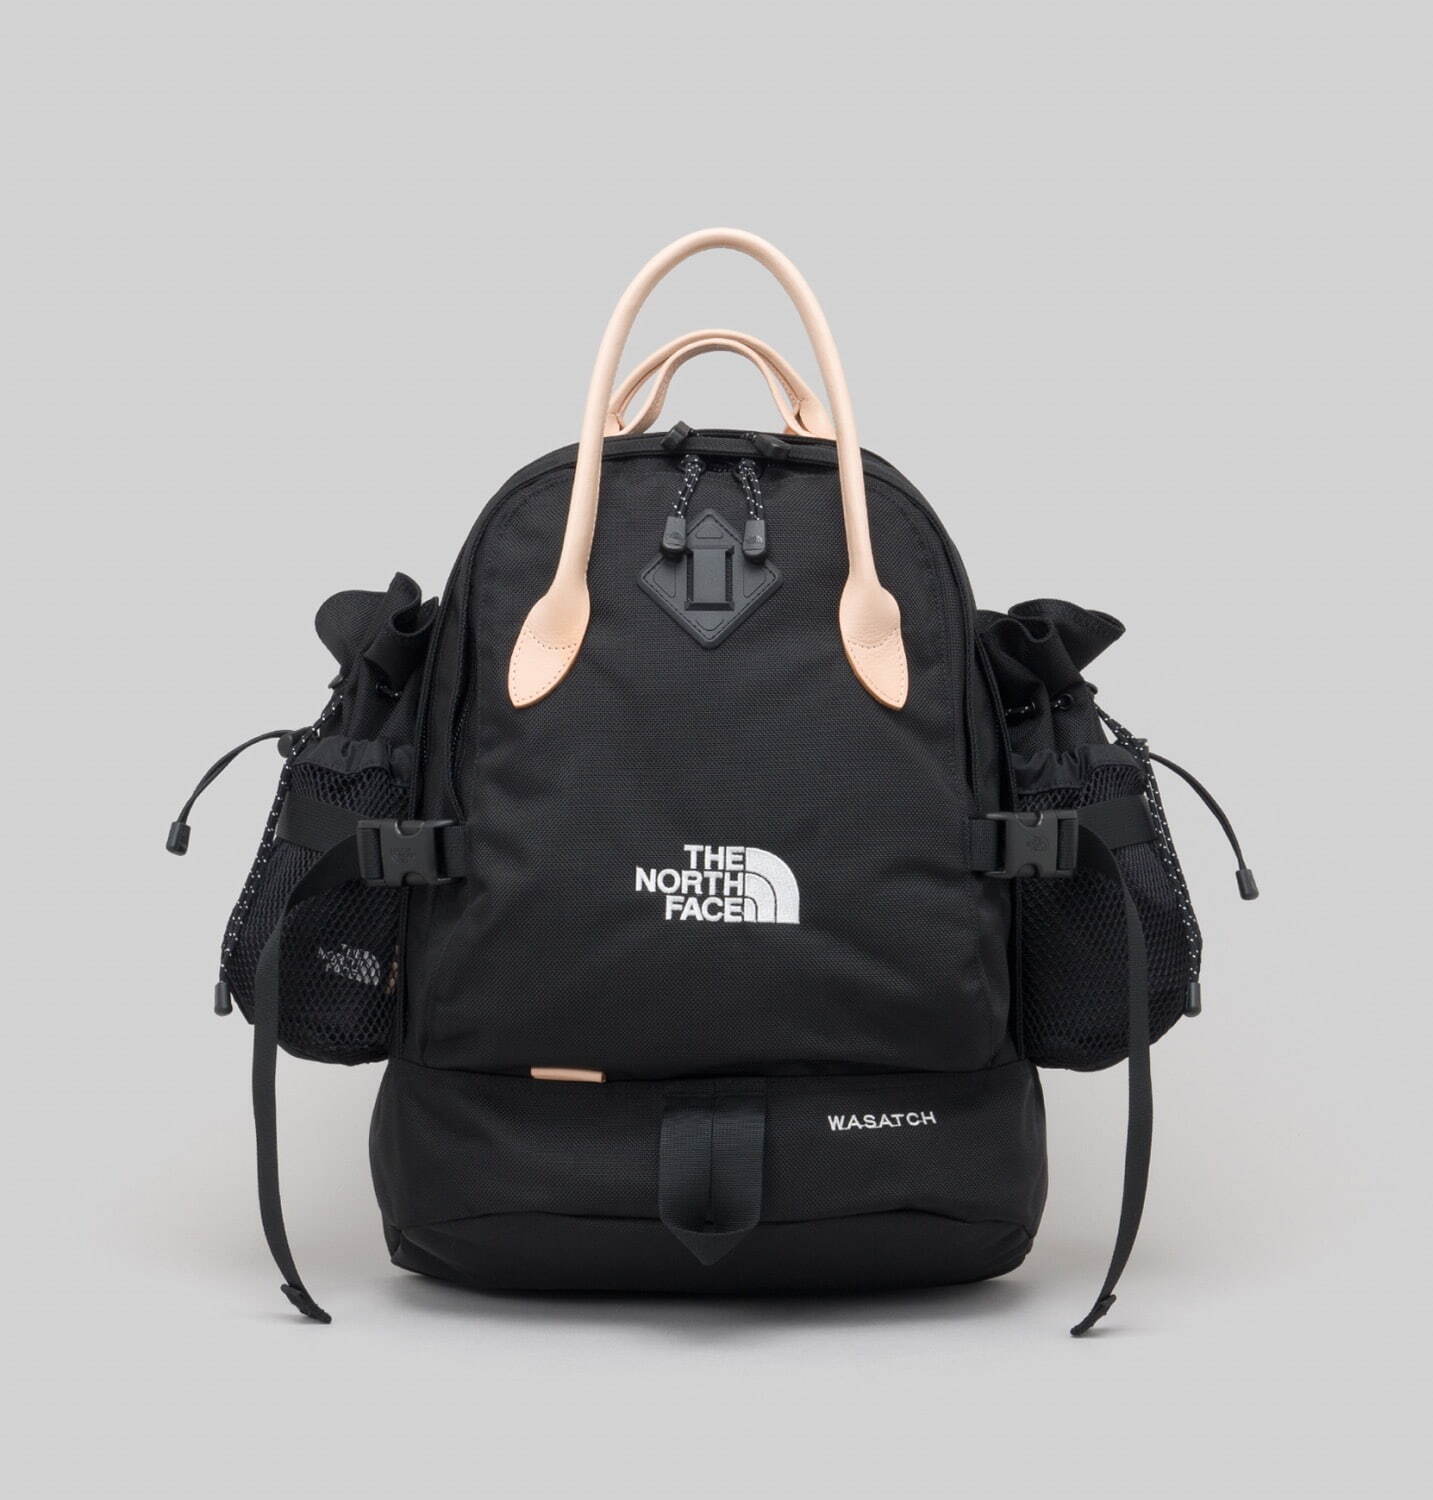 THE NORTH FACE Hender Scheme MB lumber - ショルダーバッグ